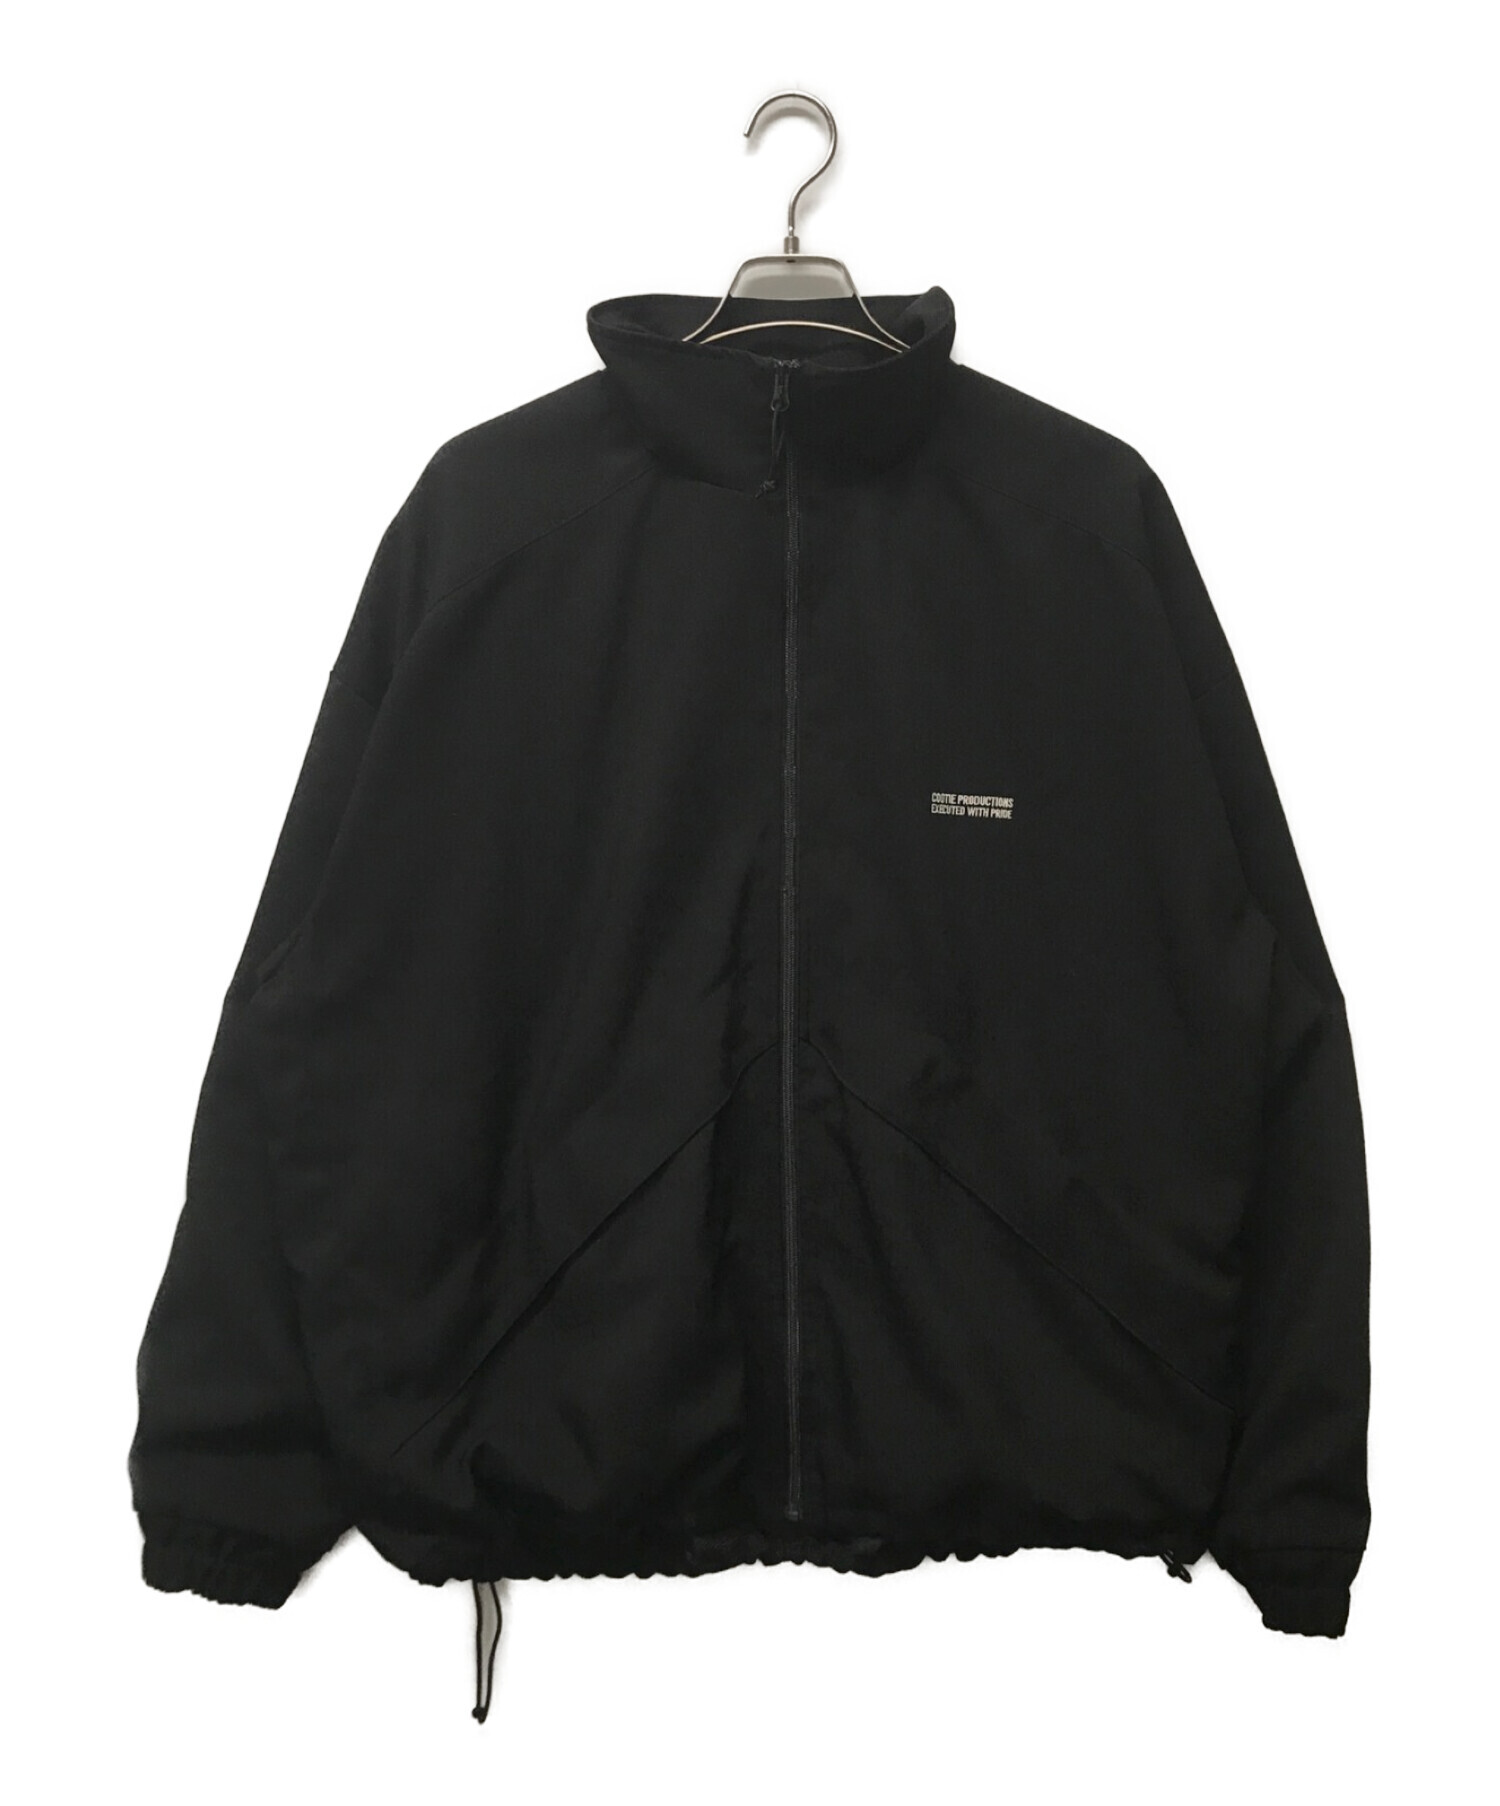 COOTIE PRODUCTIONS (クーティープロダクツ) POLYESTER OX RAZA TRACK JACKET ブラック サイズ:XL